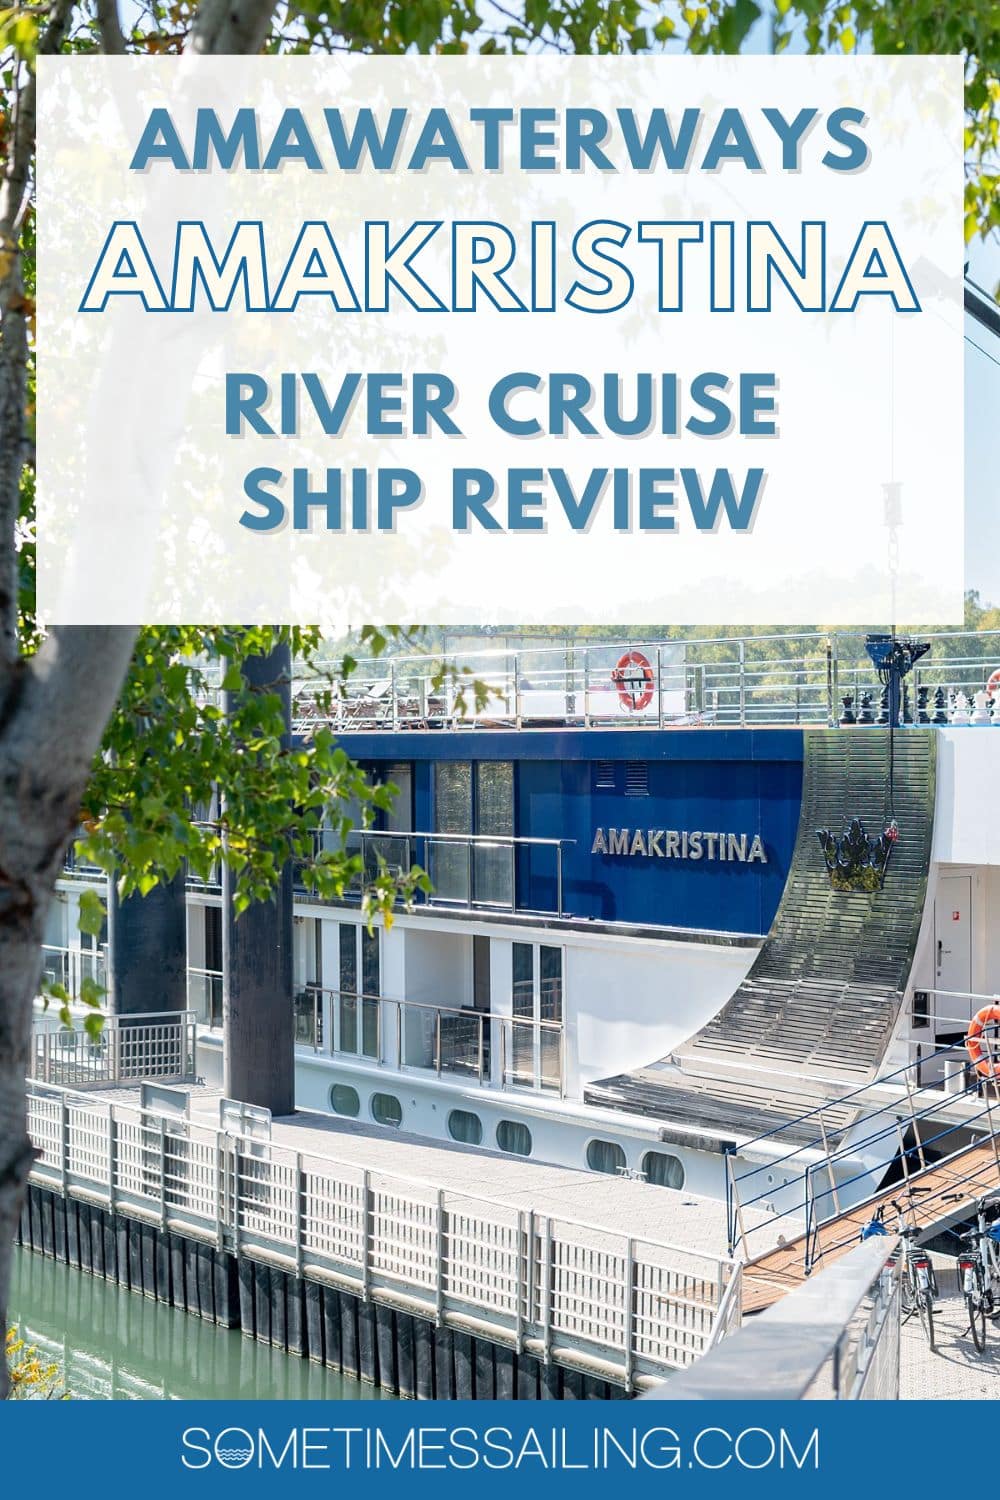 AmaWaterways AmaKristina cruise review, with a photo of the river cruise ship.